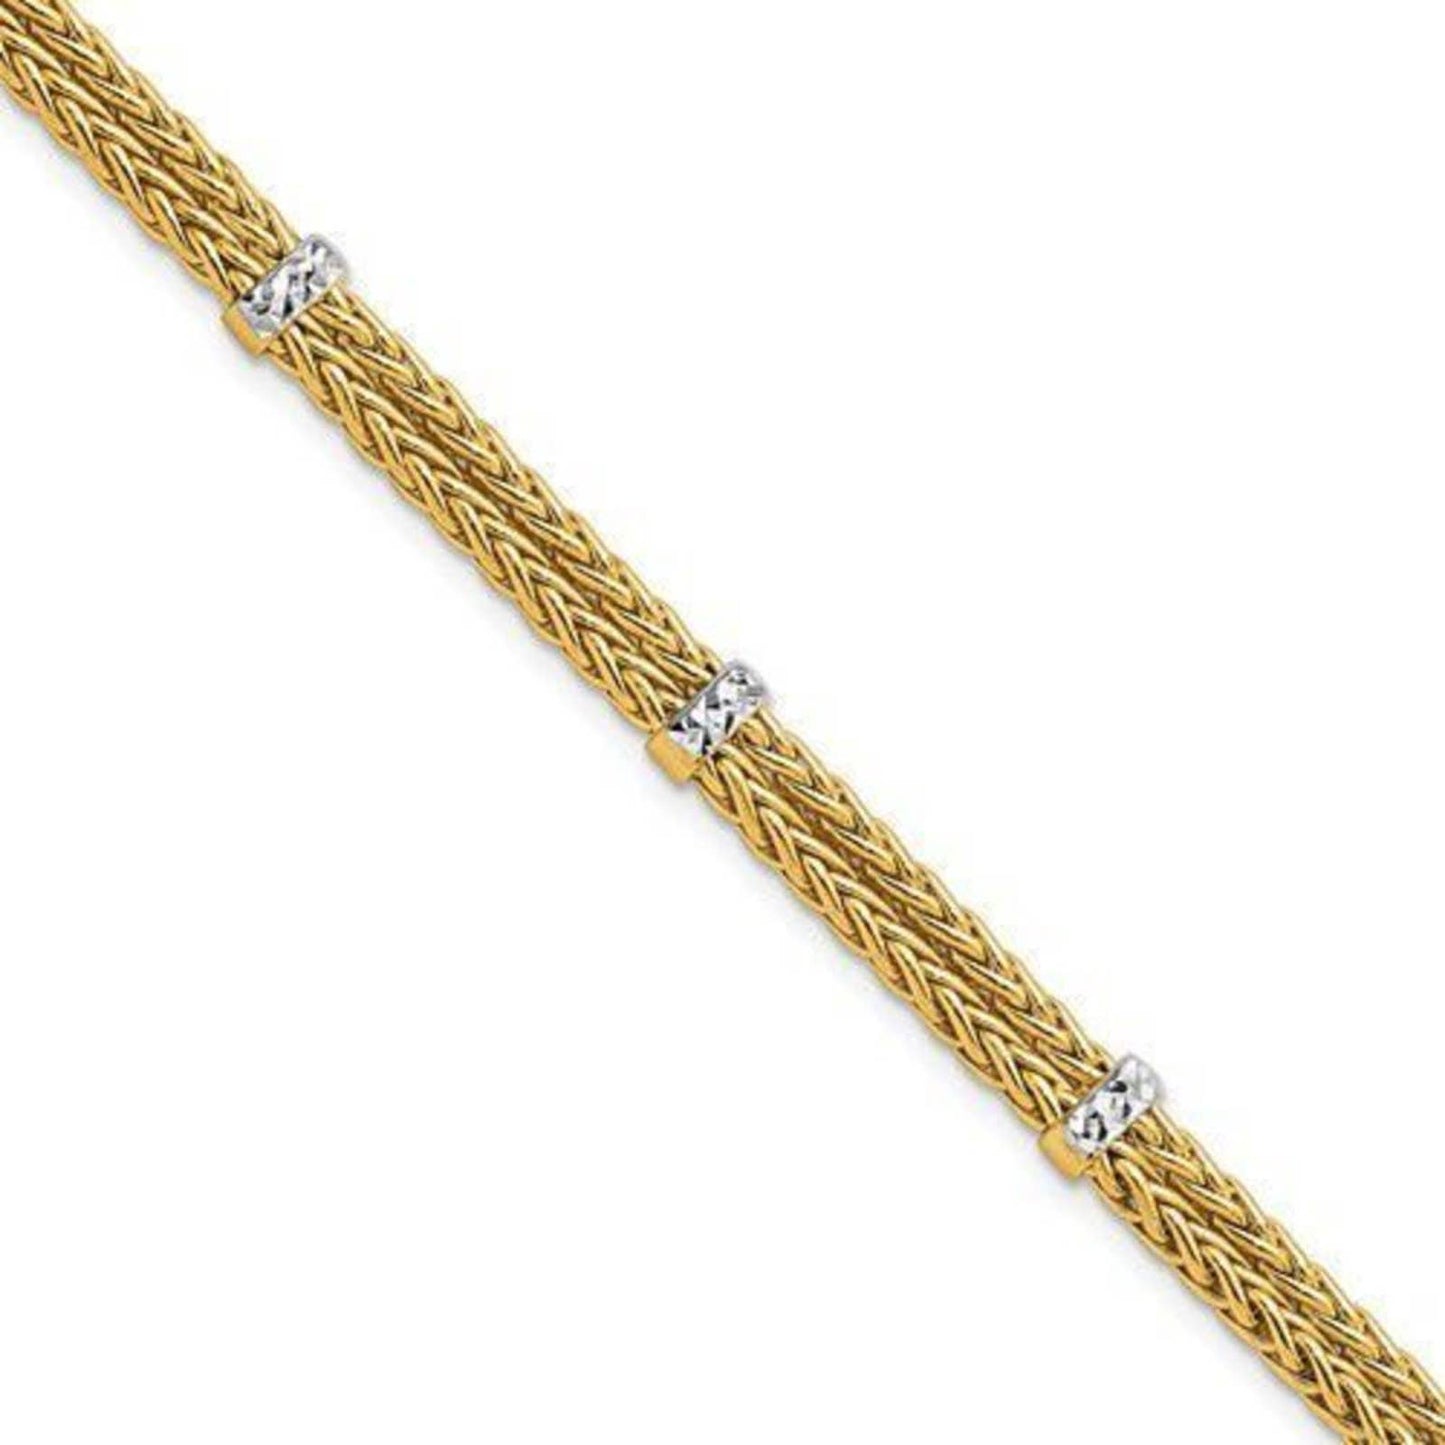 14K Gold Polished Double Wheat Chain Bracelet- 7.5 inches long